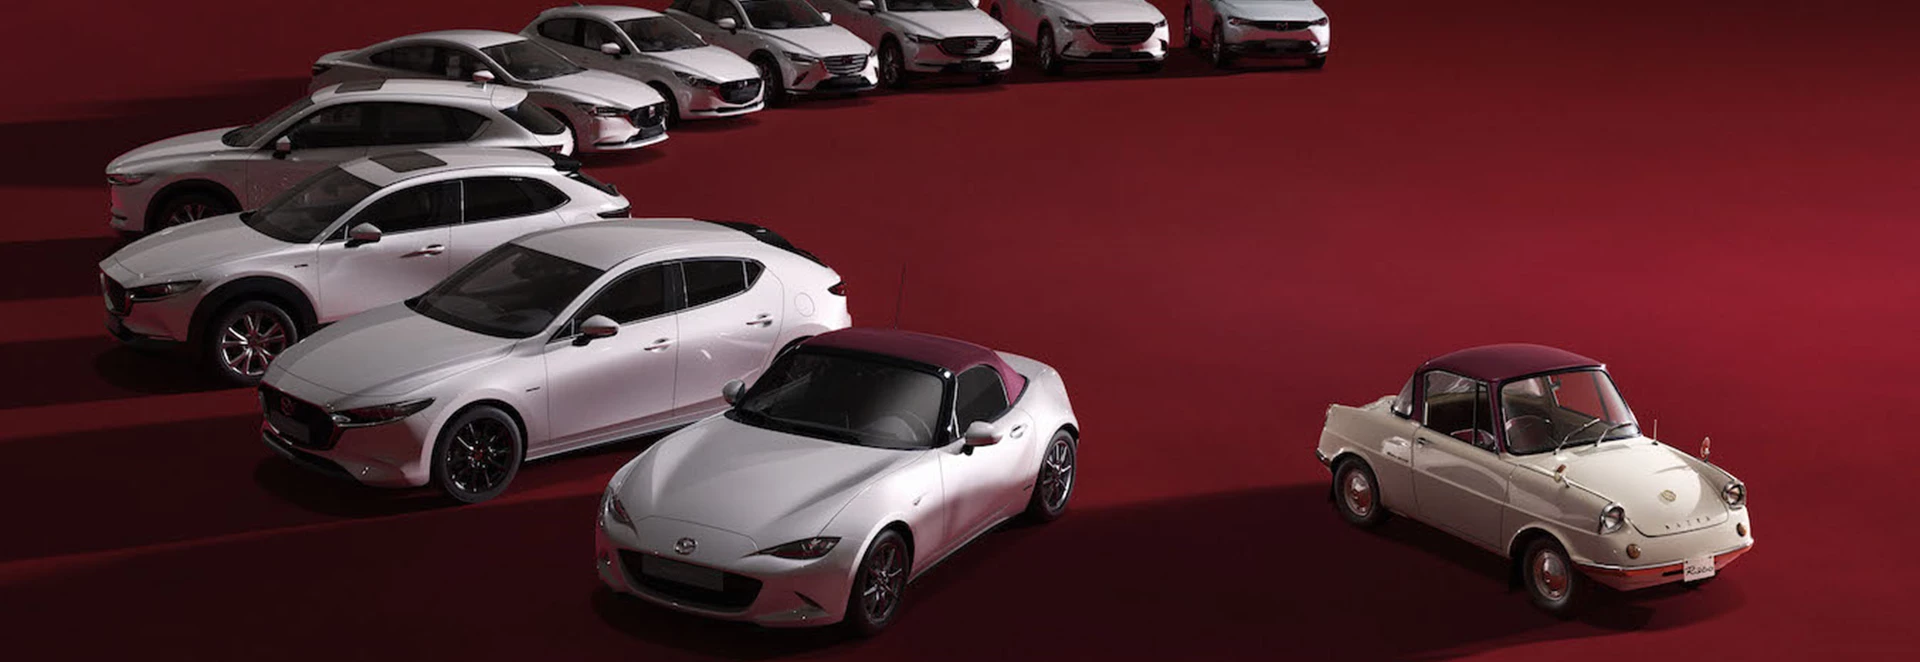 Mazda celebrates centenary with new special edition models 